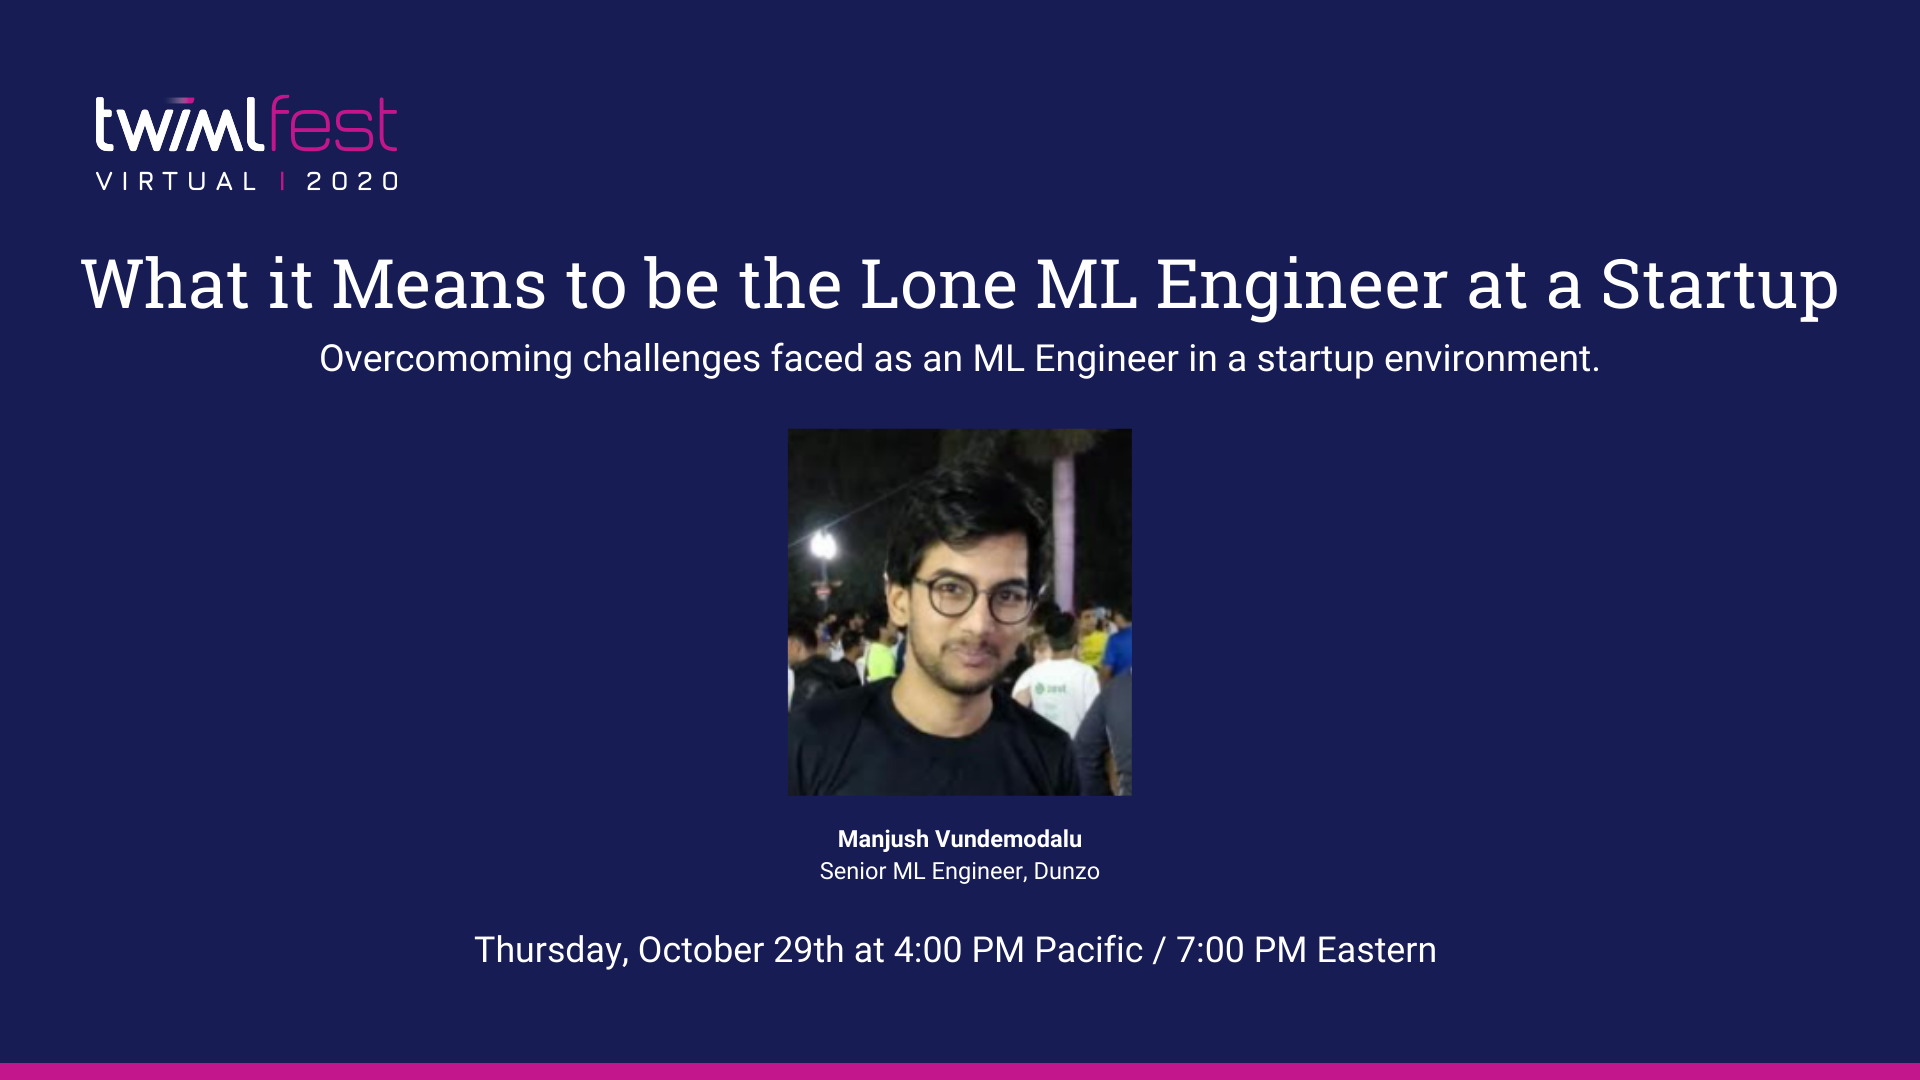 What it means to be lone ML engineer at a startup